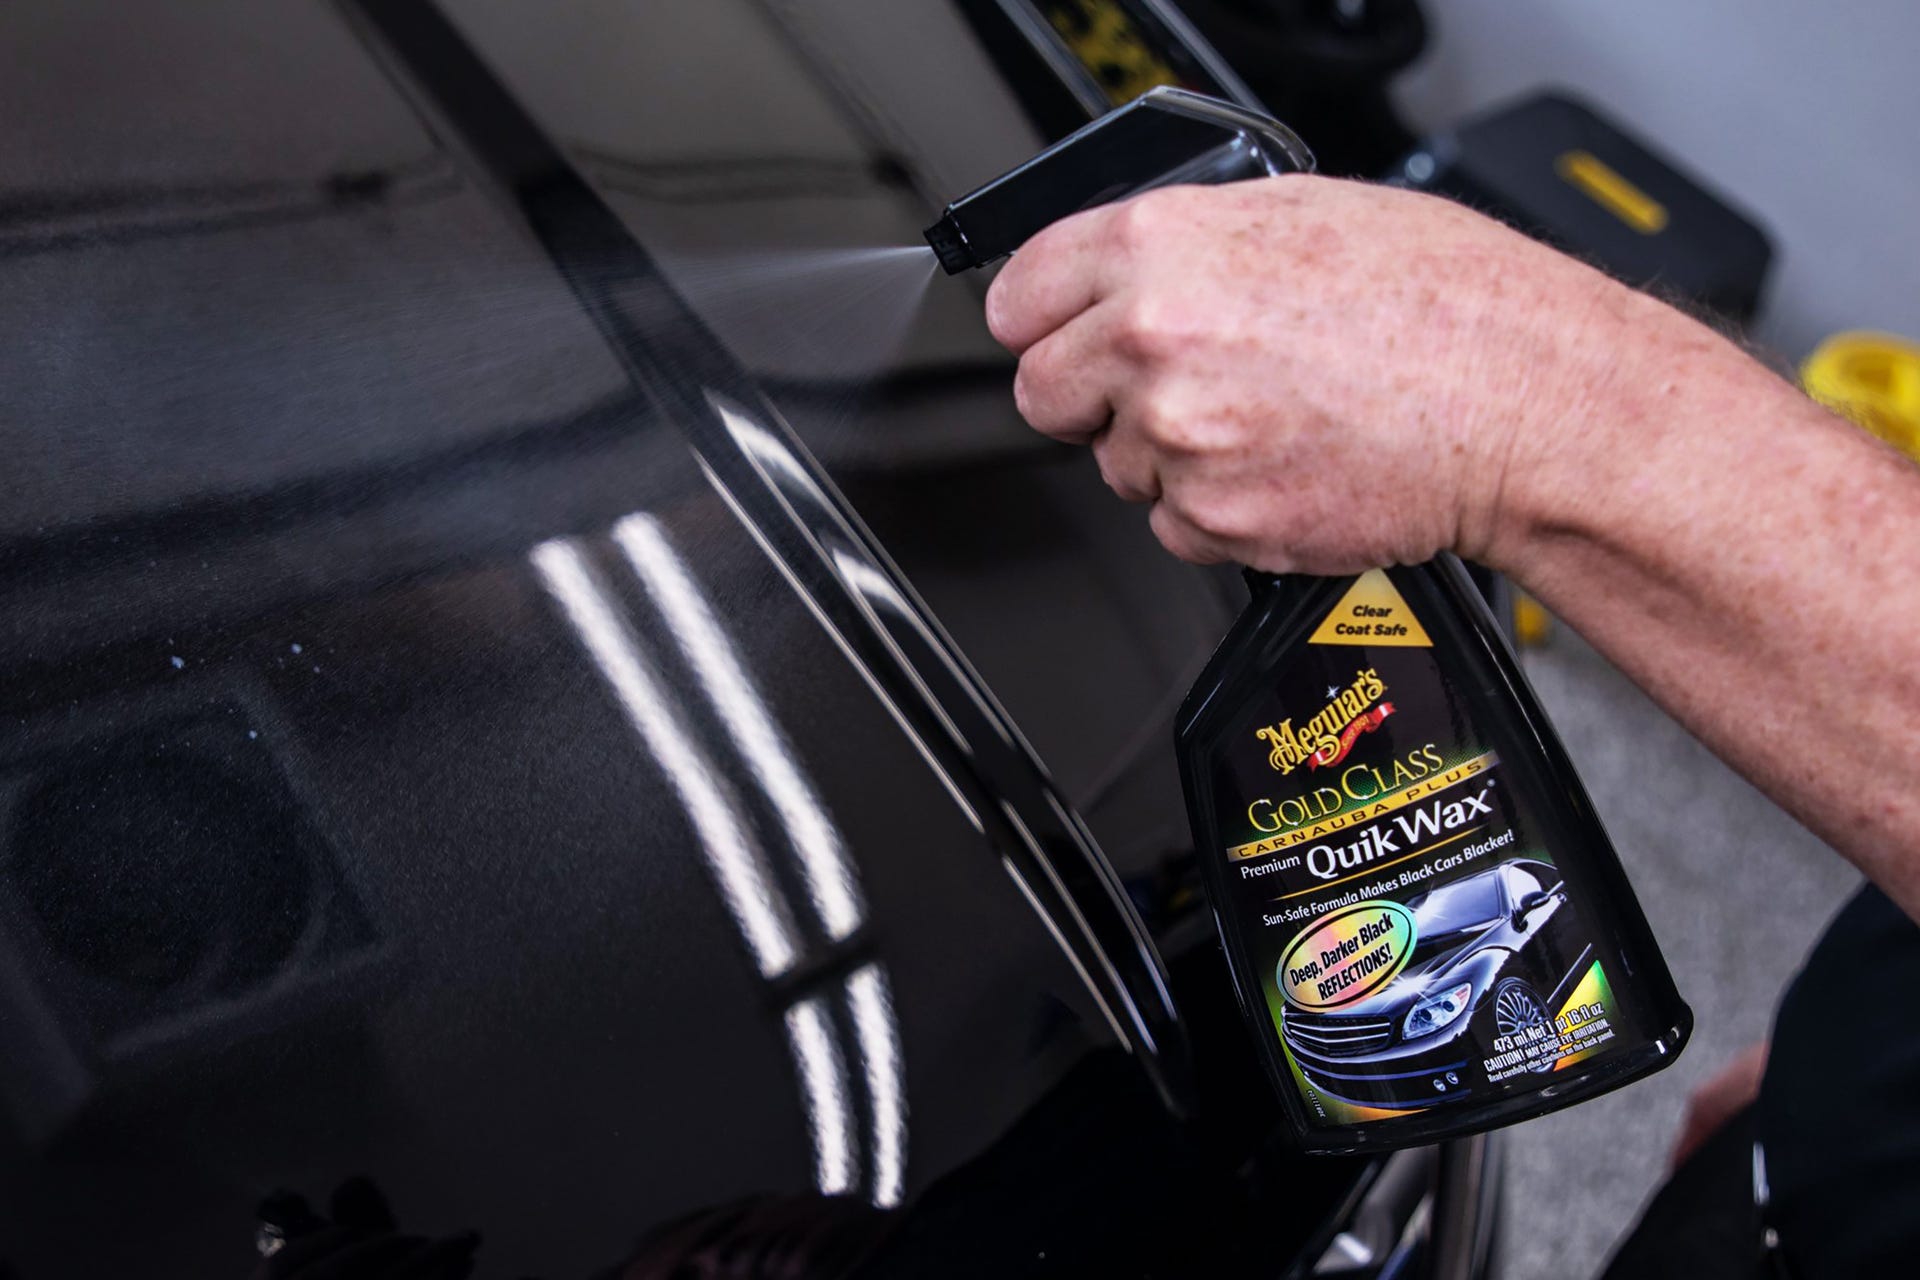 The Best Spray Wax for Black Cars - Quick Sheen